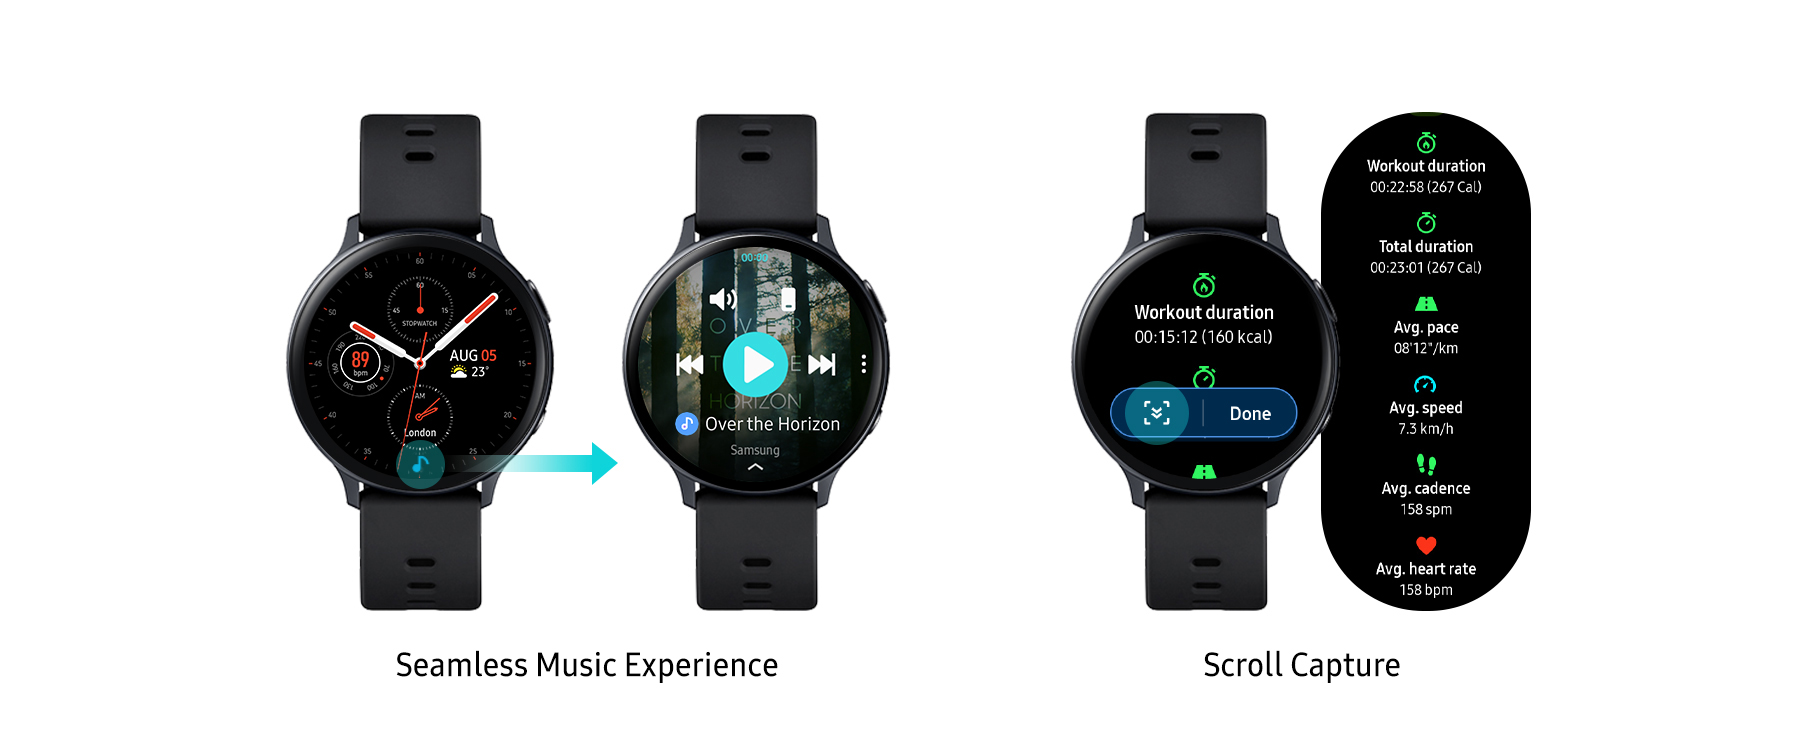 Galaxy Watch Active2 allows for a seamless music experience and supports scroll capture.